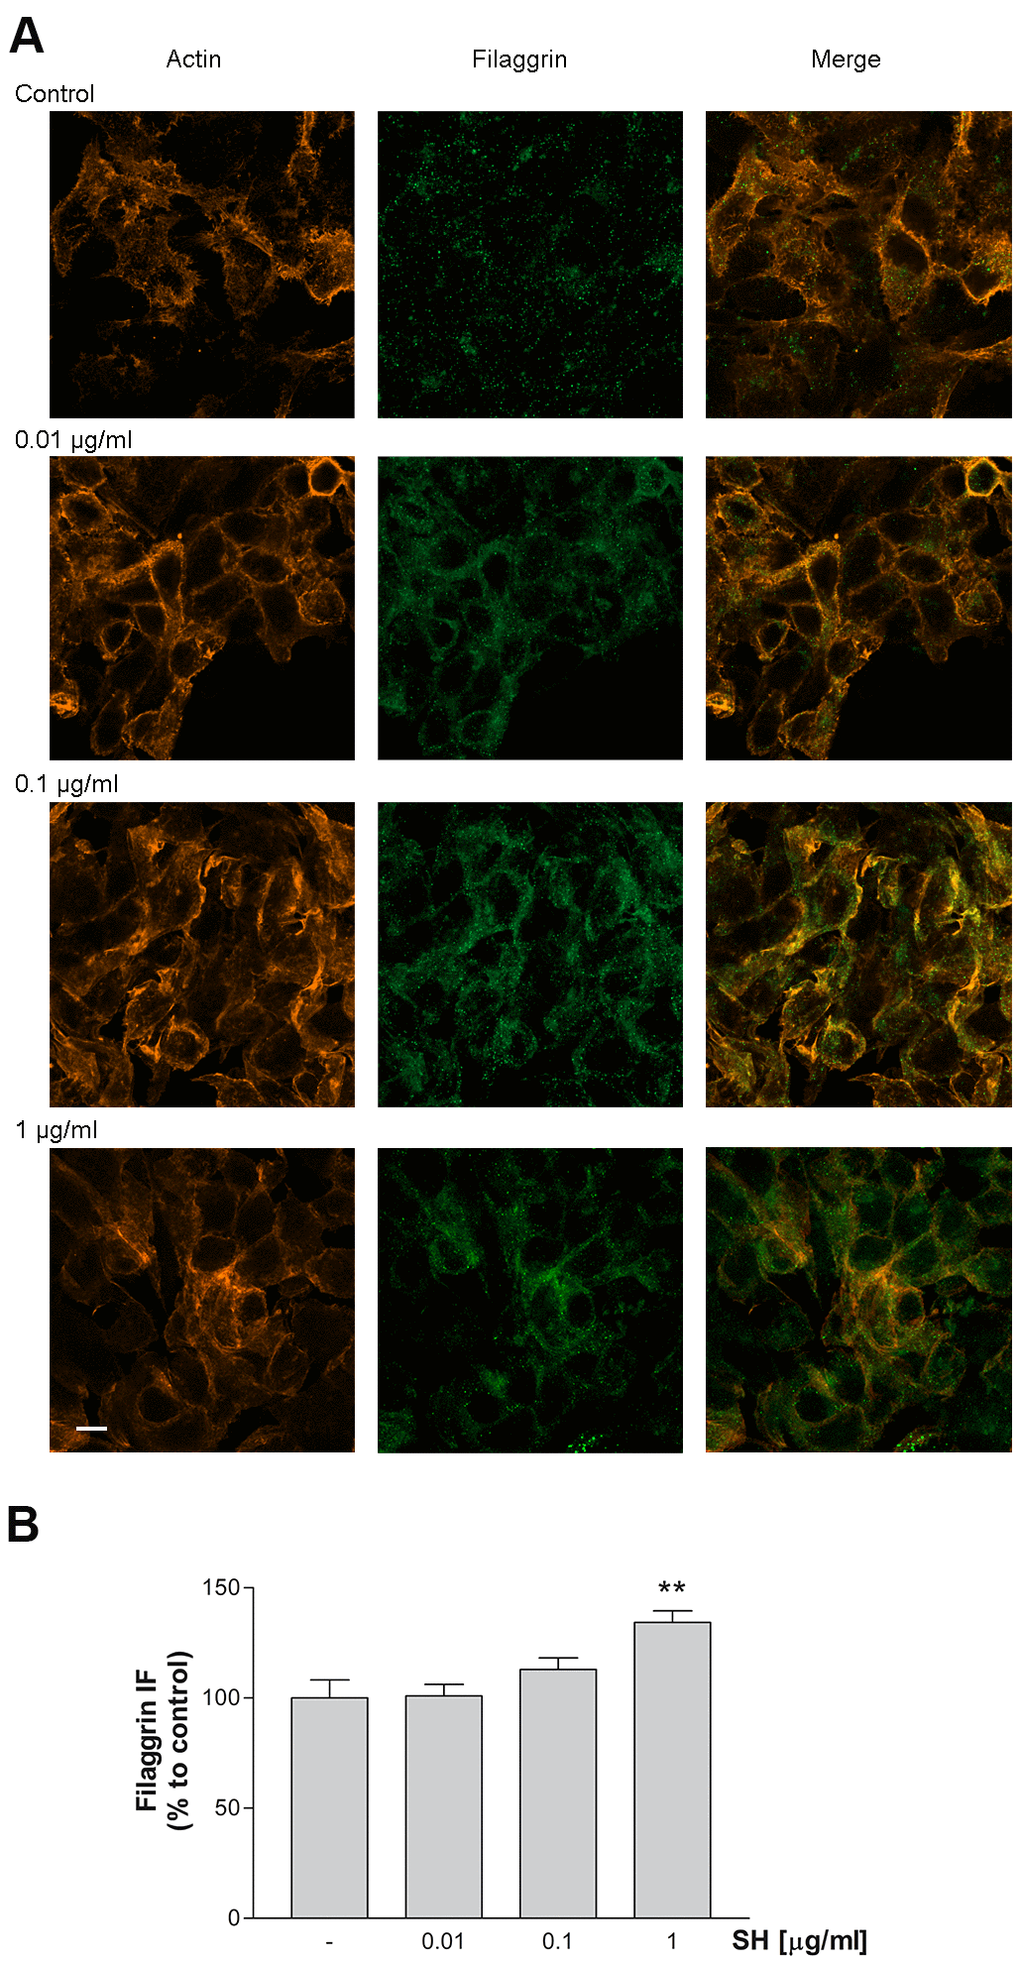 Effect of Salvia haenkei extract 0.01- 0.1 and 1 μg/ml on filaggrin and actin proteins expression in HaCaT cells. (A) Images were collected by confocal laser-scanning microscope LSM800 and software ZEN 2.1, magnification 60X, and are representative of at least 3 experiments. Scale bar = 10μm. (B) Quantitative analysis of filaggrin fluorescence intensity (related to area). Results are the mean ± SEM of 3-5 experiments. **pvs control.